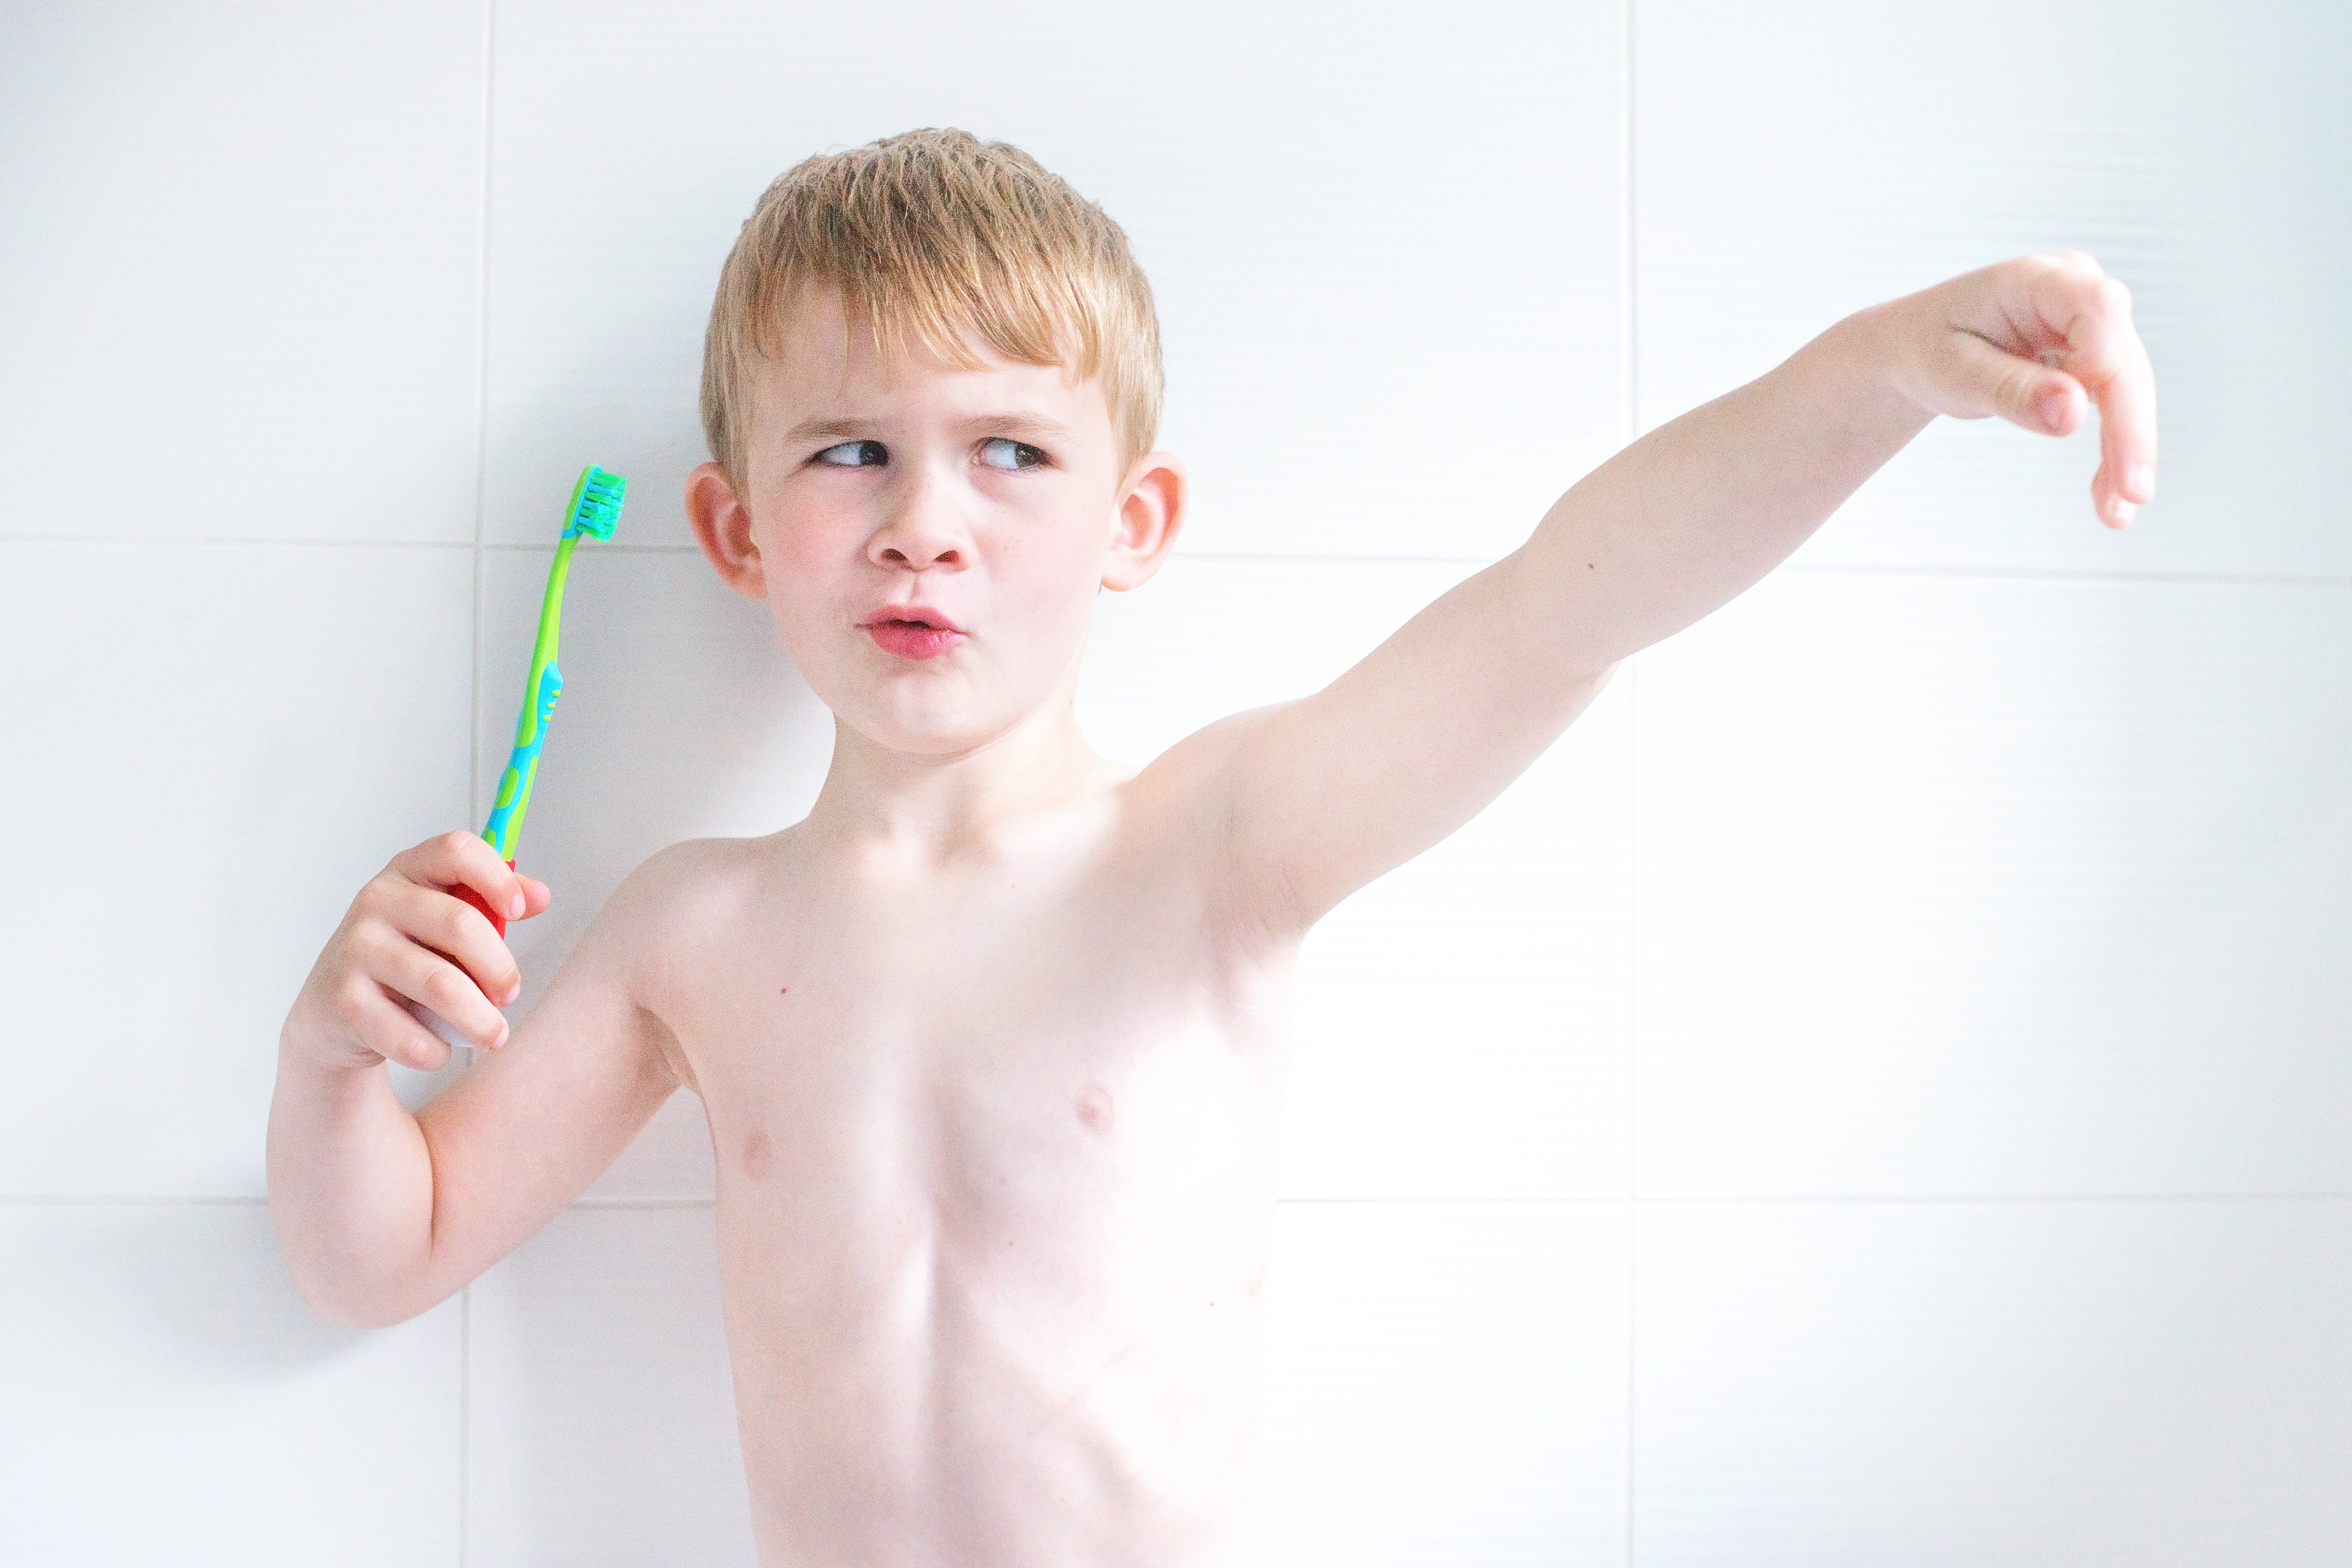 BETTER TOOTHBRUSHING FOR LONGER? NO LONGER AN ISSUE WITH PLAYBRUSH